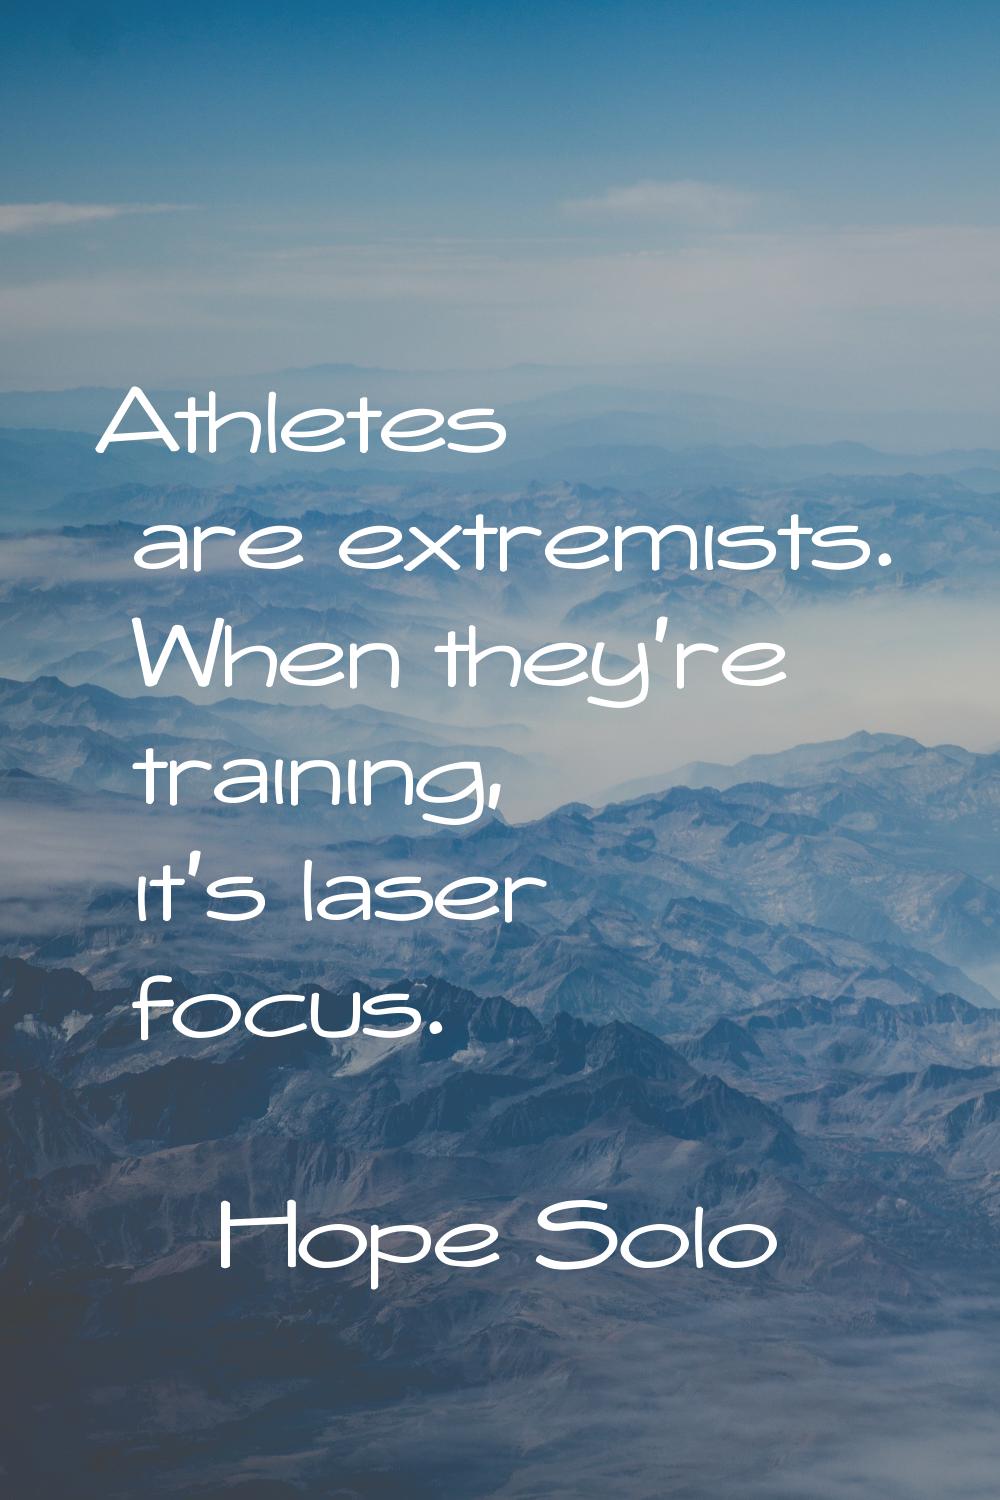 Athletes are extremists. When they're training, it's laser focus.